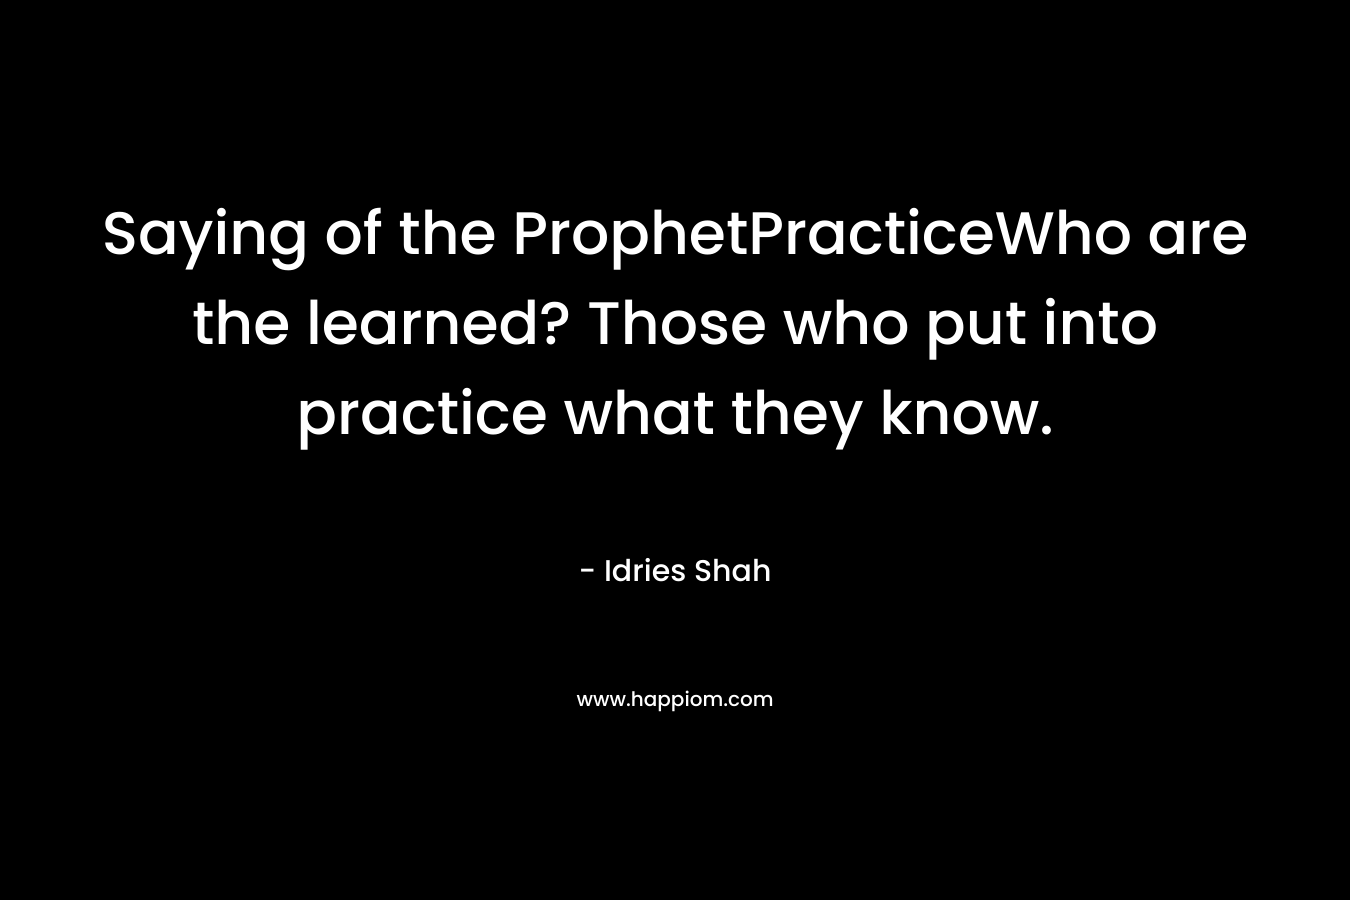 Saying of the ProphetPracticeWho are the learned? Those who put into practice what they know.